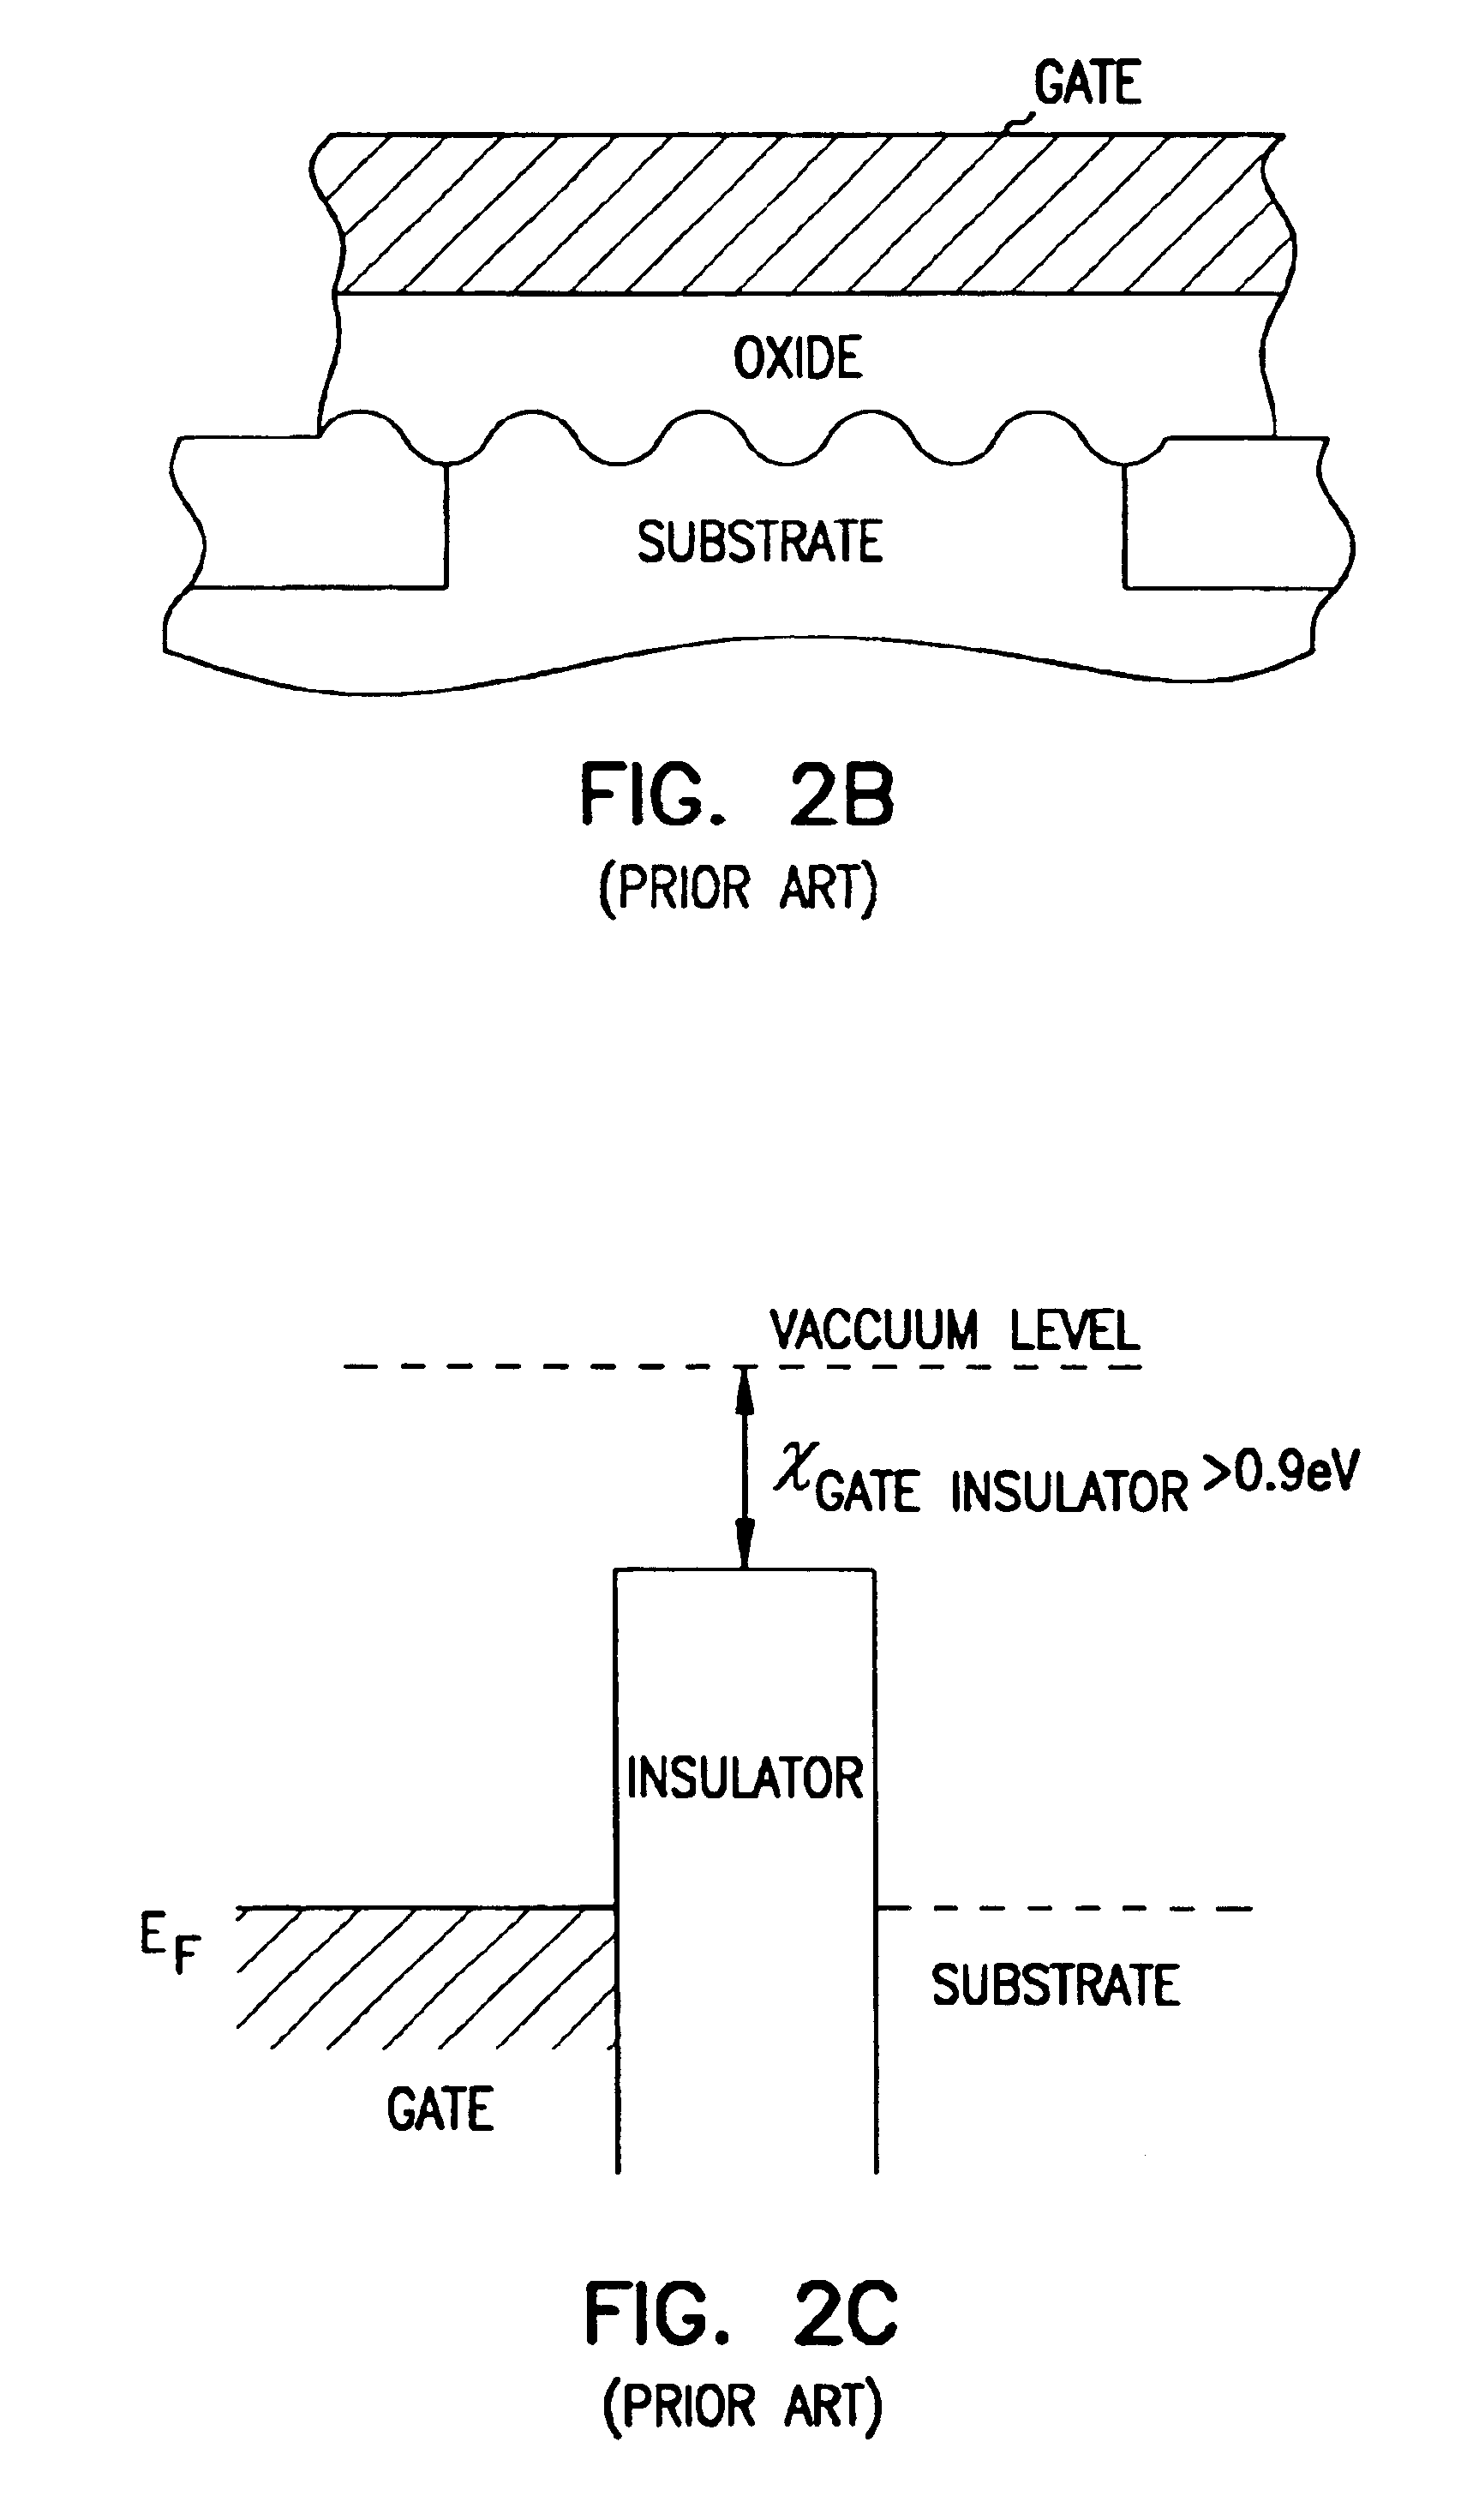 Graded composition gate insulators to reduce tunneling barriers in flash memory devices